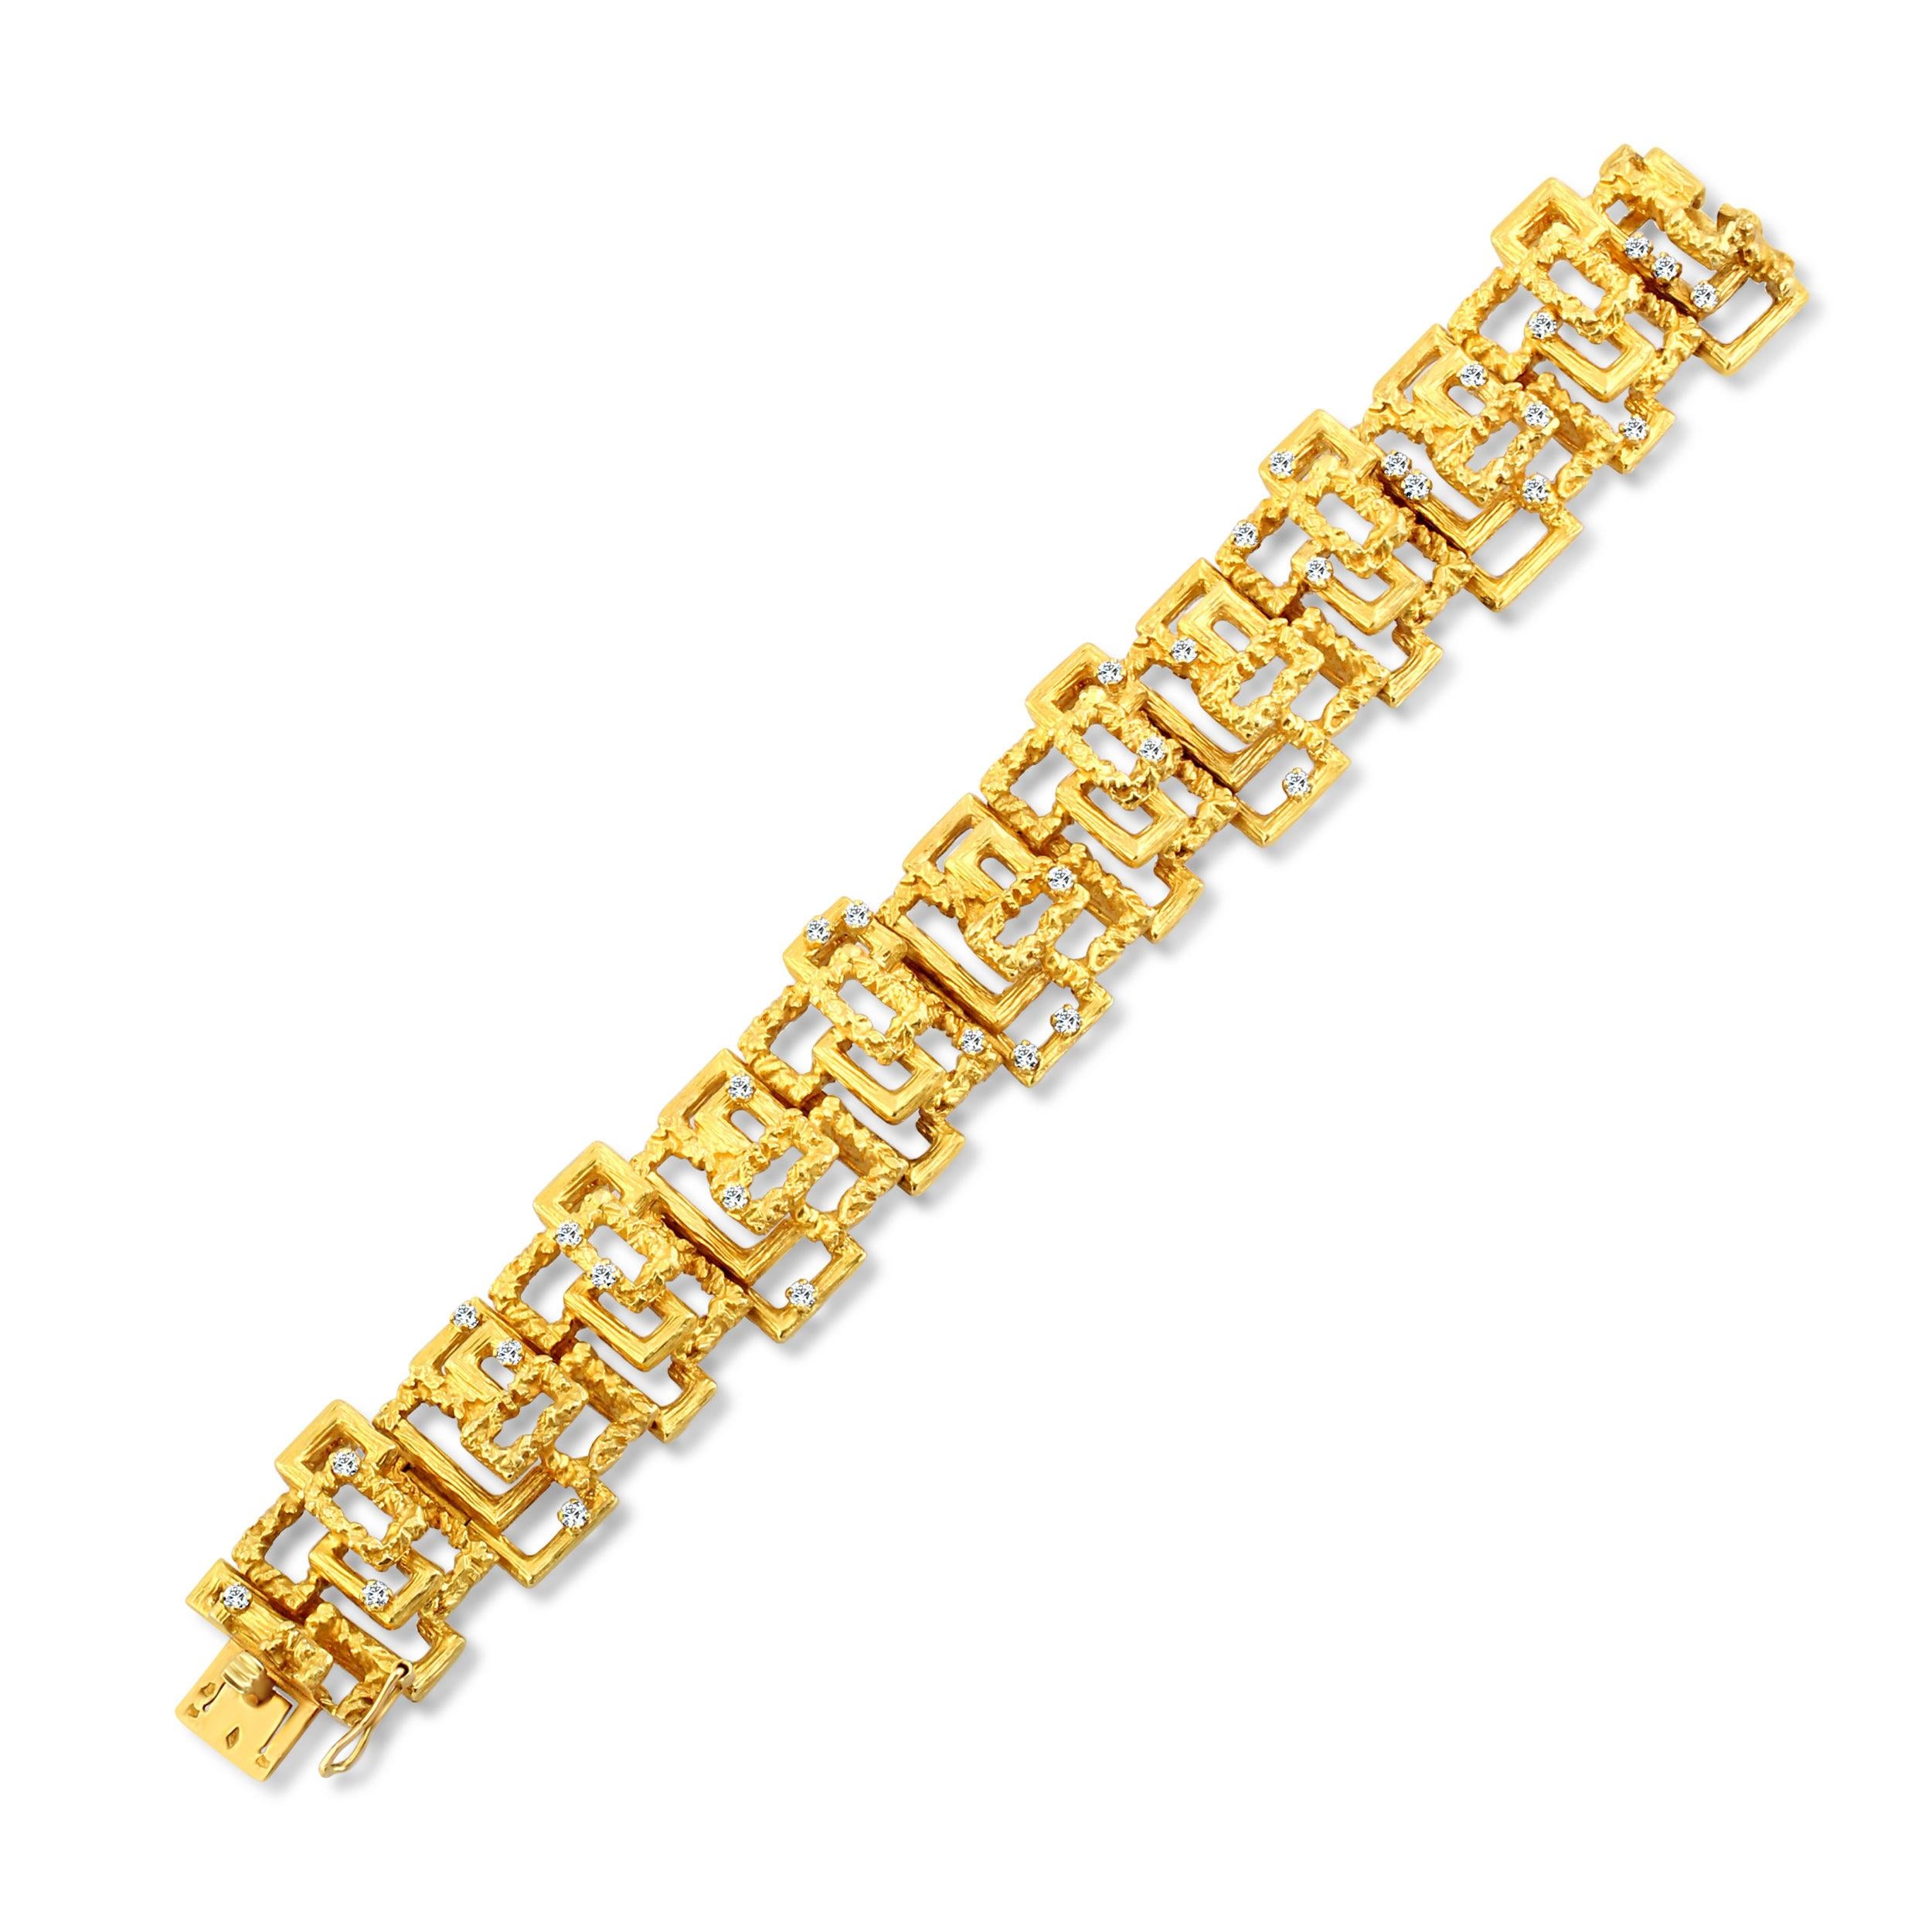 A fine demi-parure consisting of a bracelet and pair of earrings. This beautiful vintage piece is crafted from 18k gold openwork panels in an interlocking textured design set with circle-cut diamonds. Circa 1970s. Bracelet = 17cm. Earrings = 2cm.